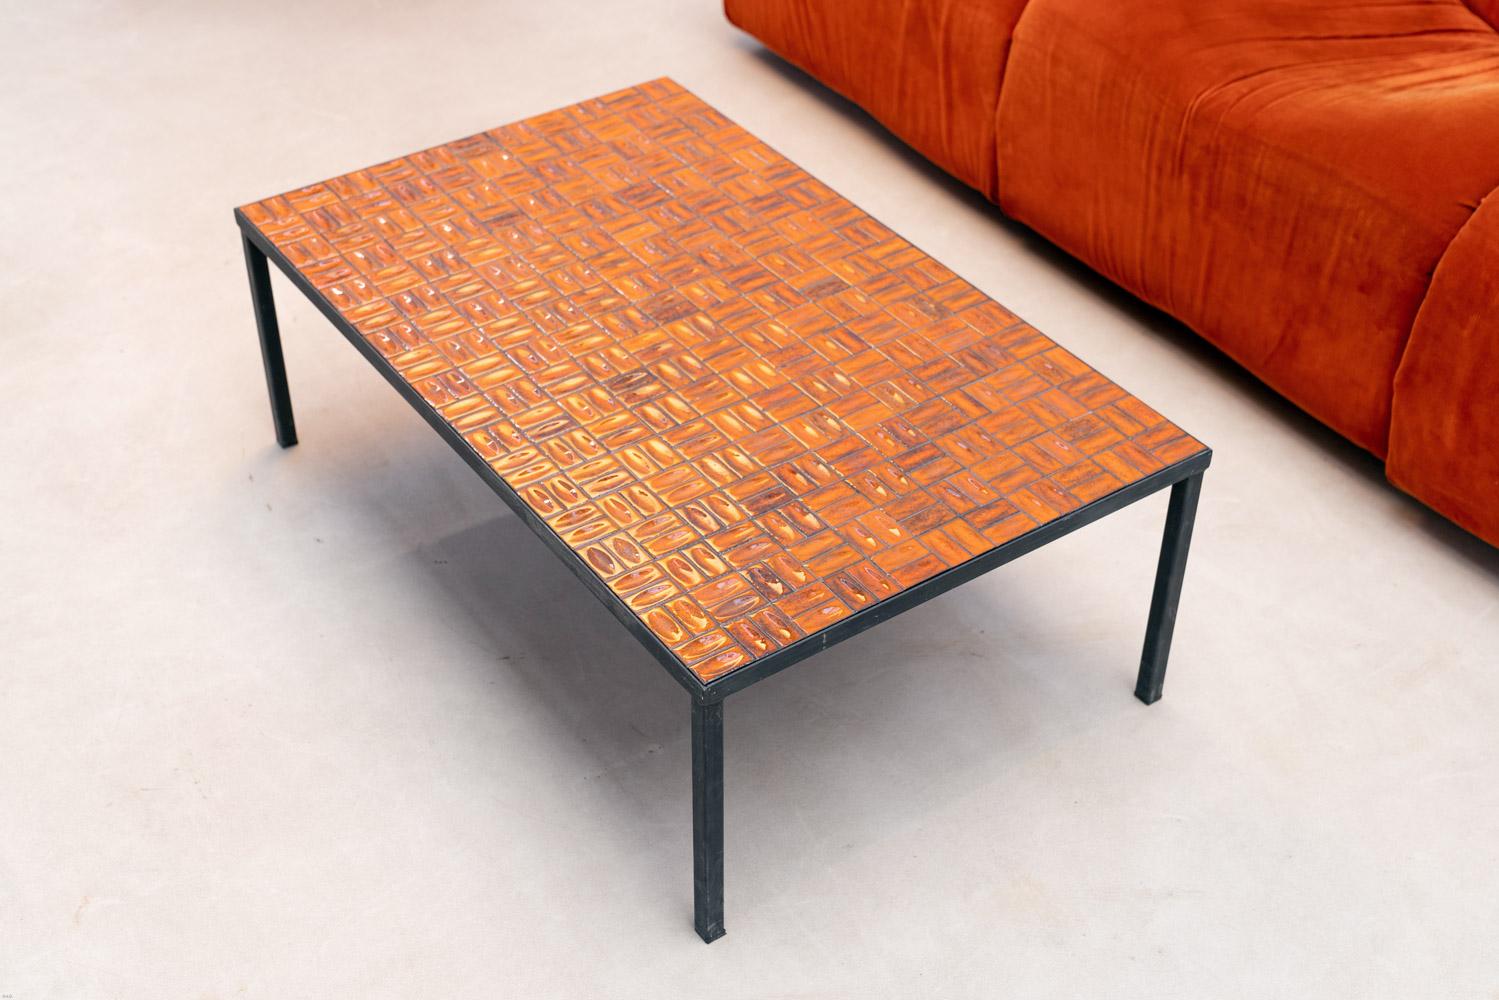 French coffee table covered with orange ceramic on a black metal frame.
A nice touch of '60s color  for your interiors.

Do not hesitate to contact us for any additional information. We would be more than delighted to assist you in any way we can.